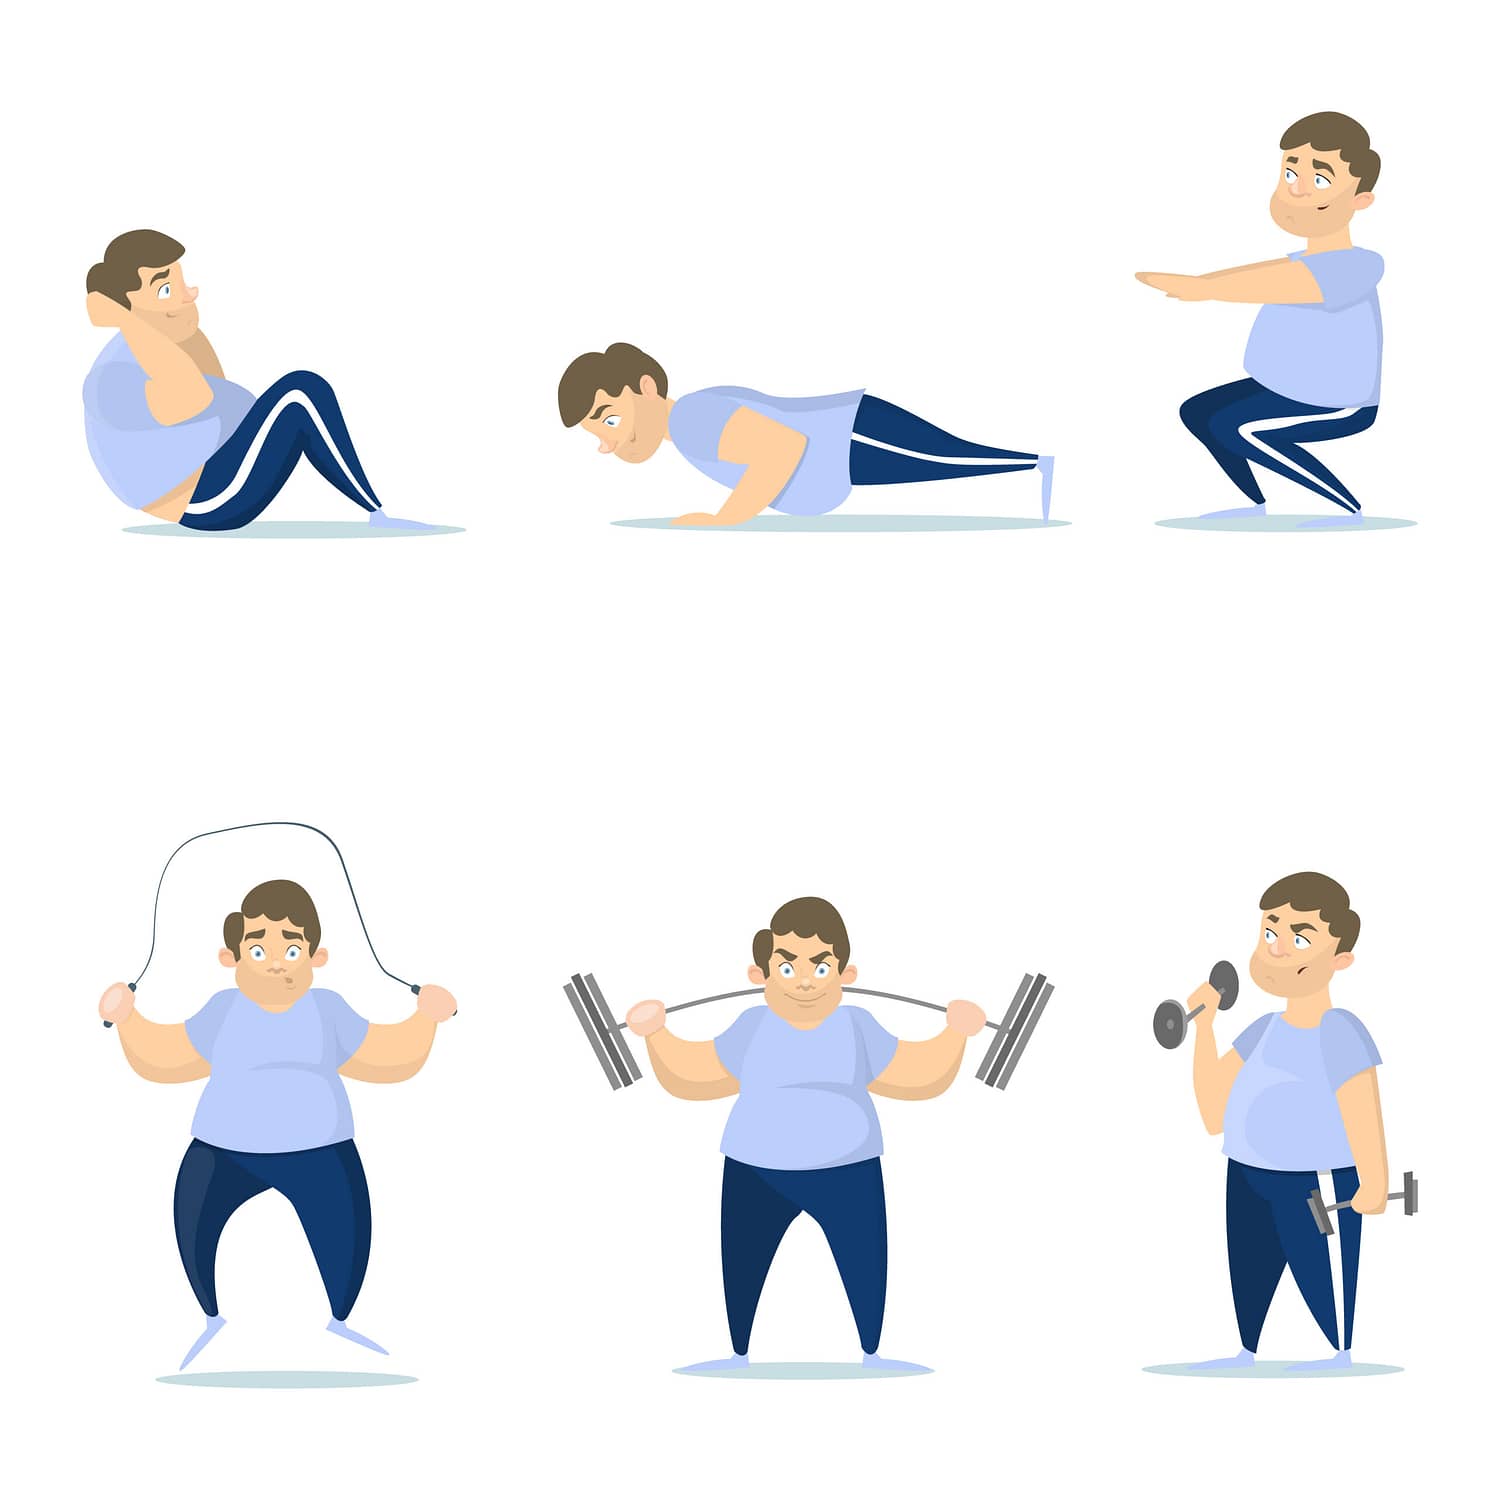 Fat man training set on white background. Jumping, squats and push ups - 4-week workout plan for weight loss male